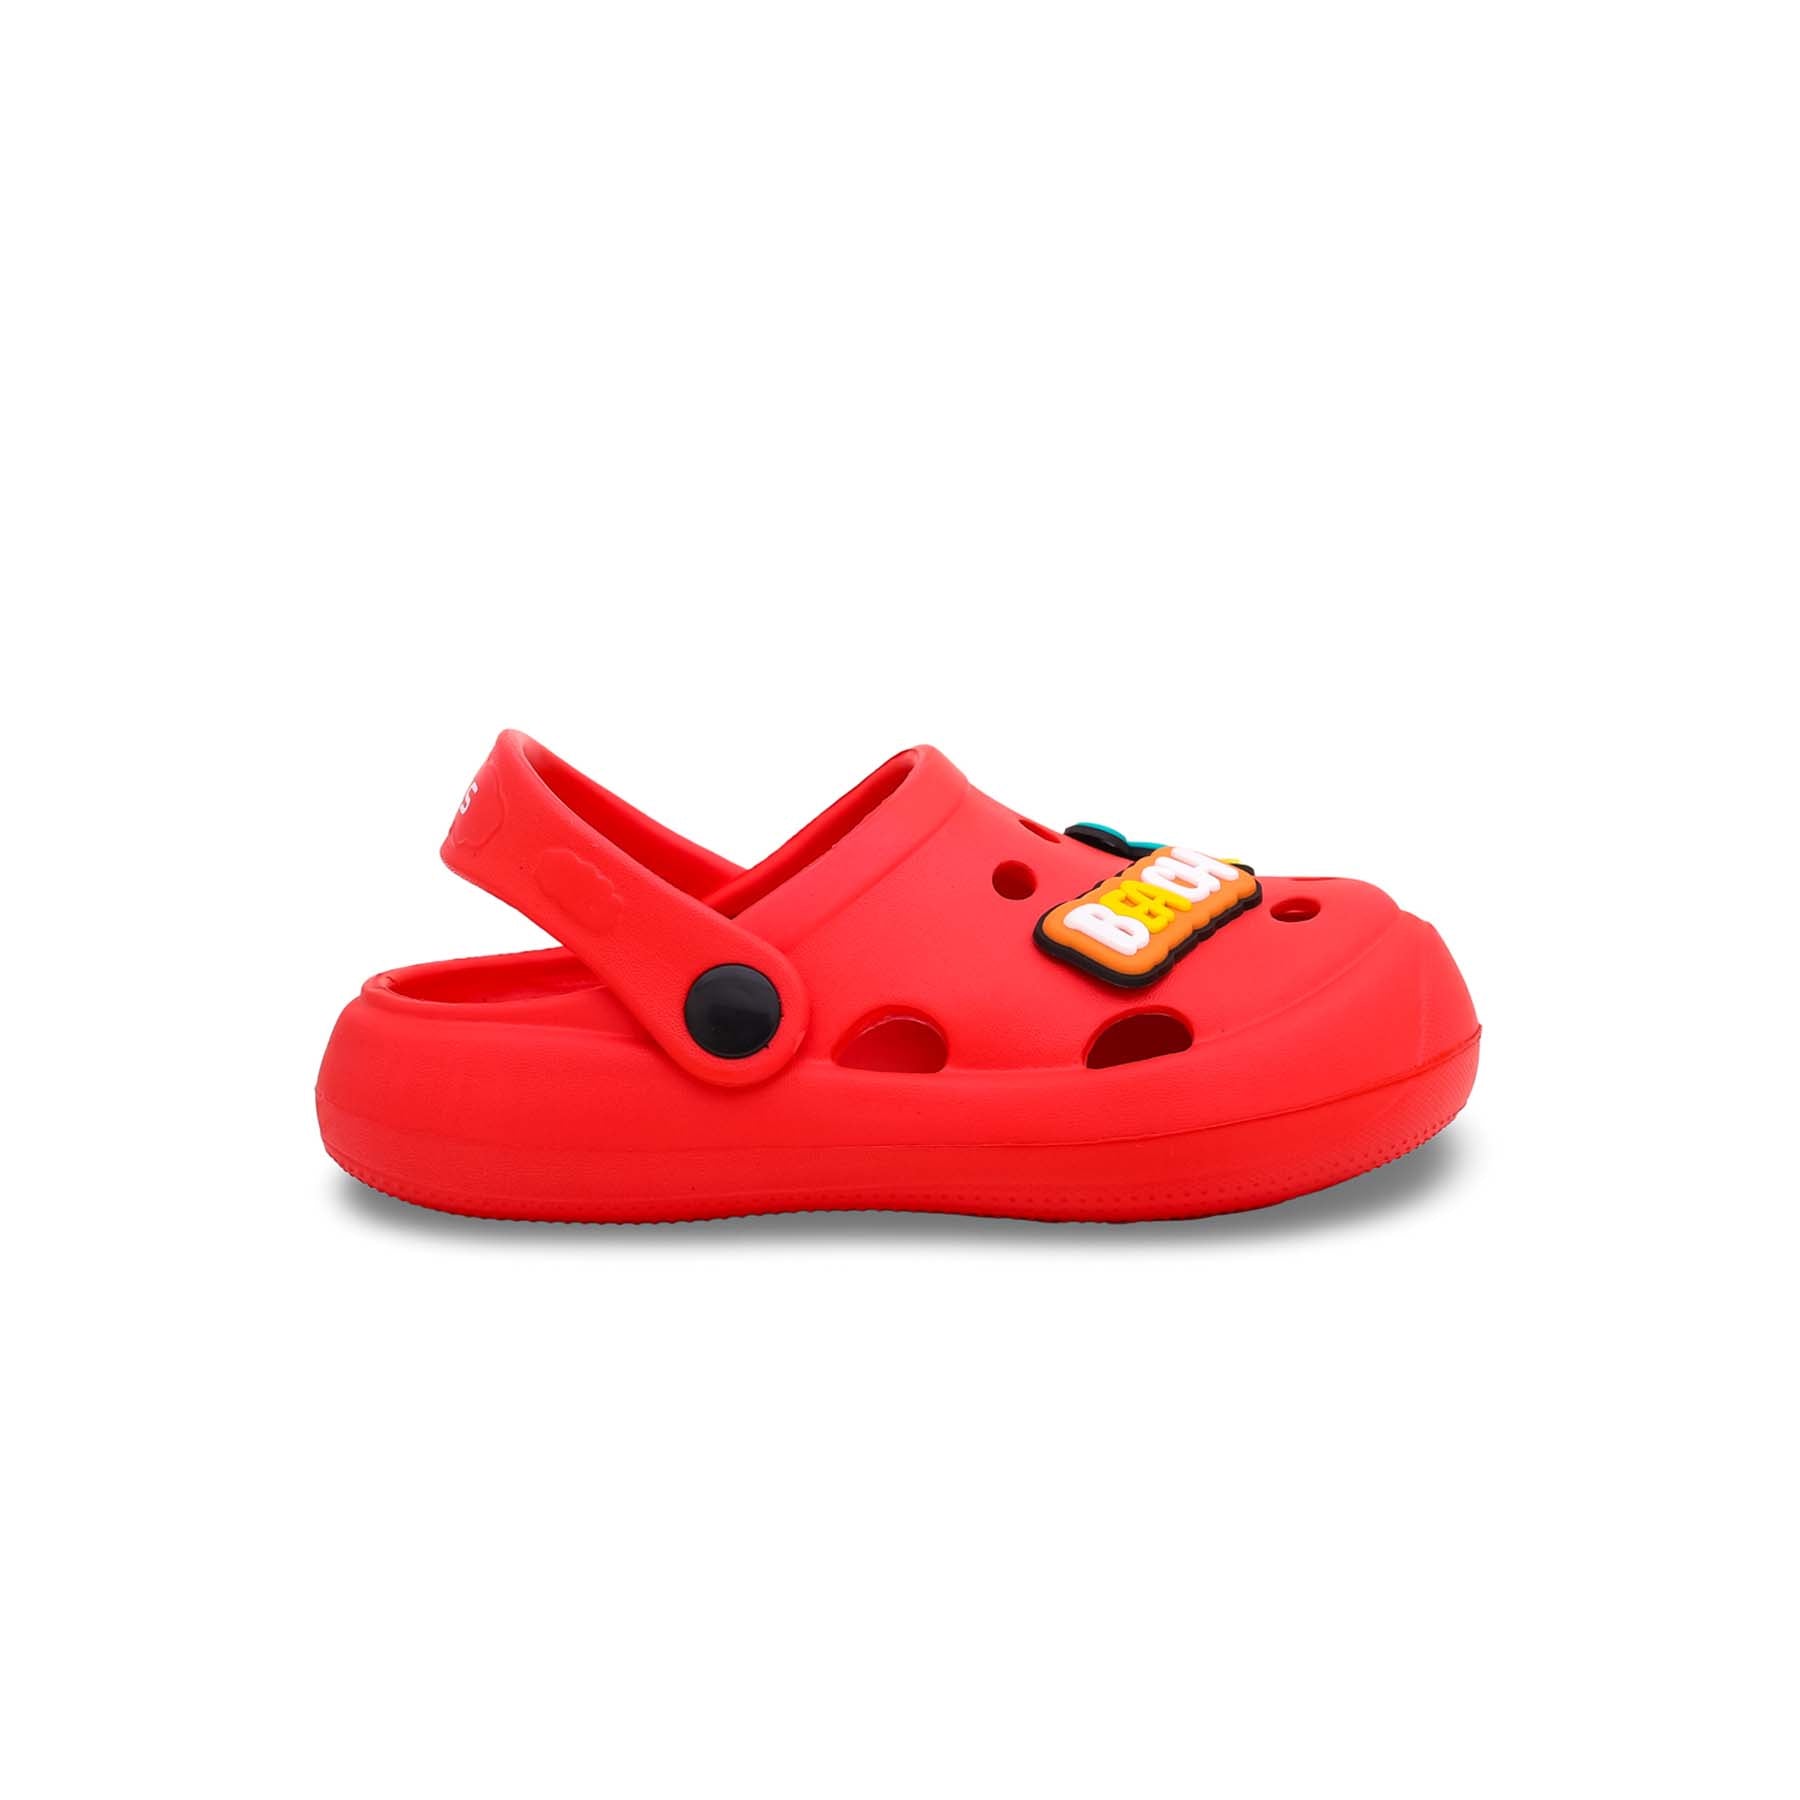 Boys Red Casual Flip Flop KD5229